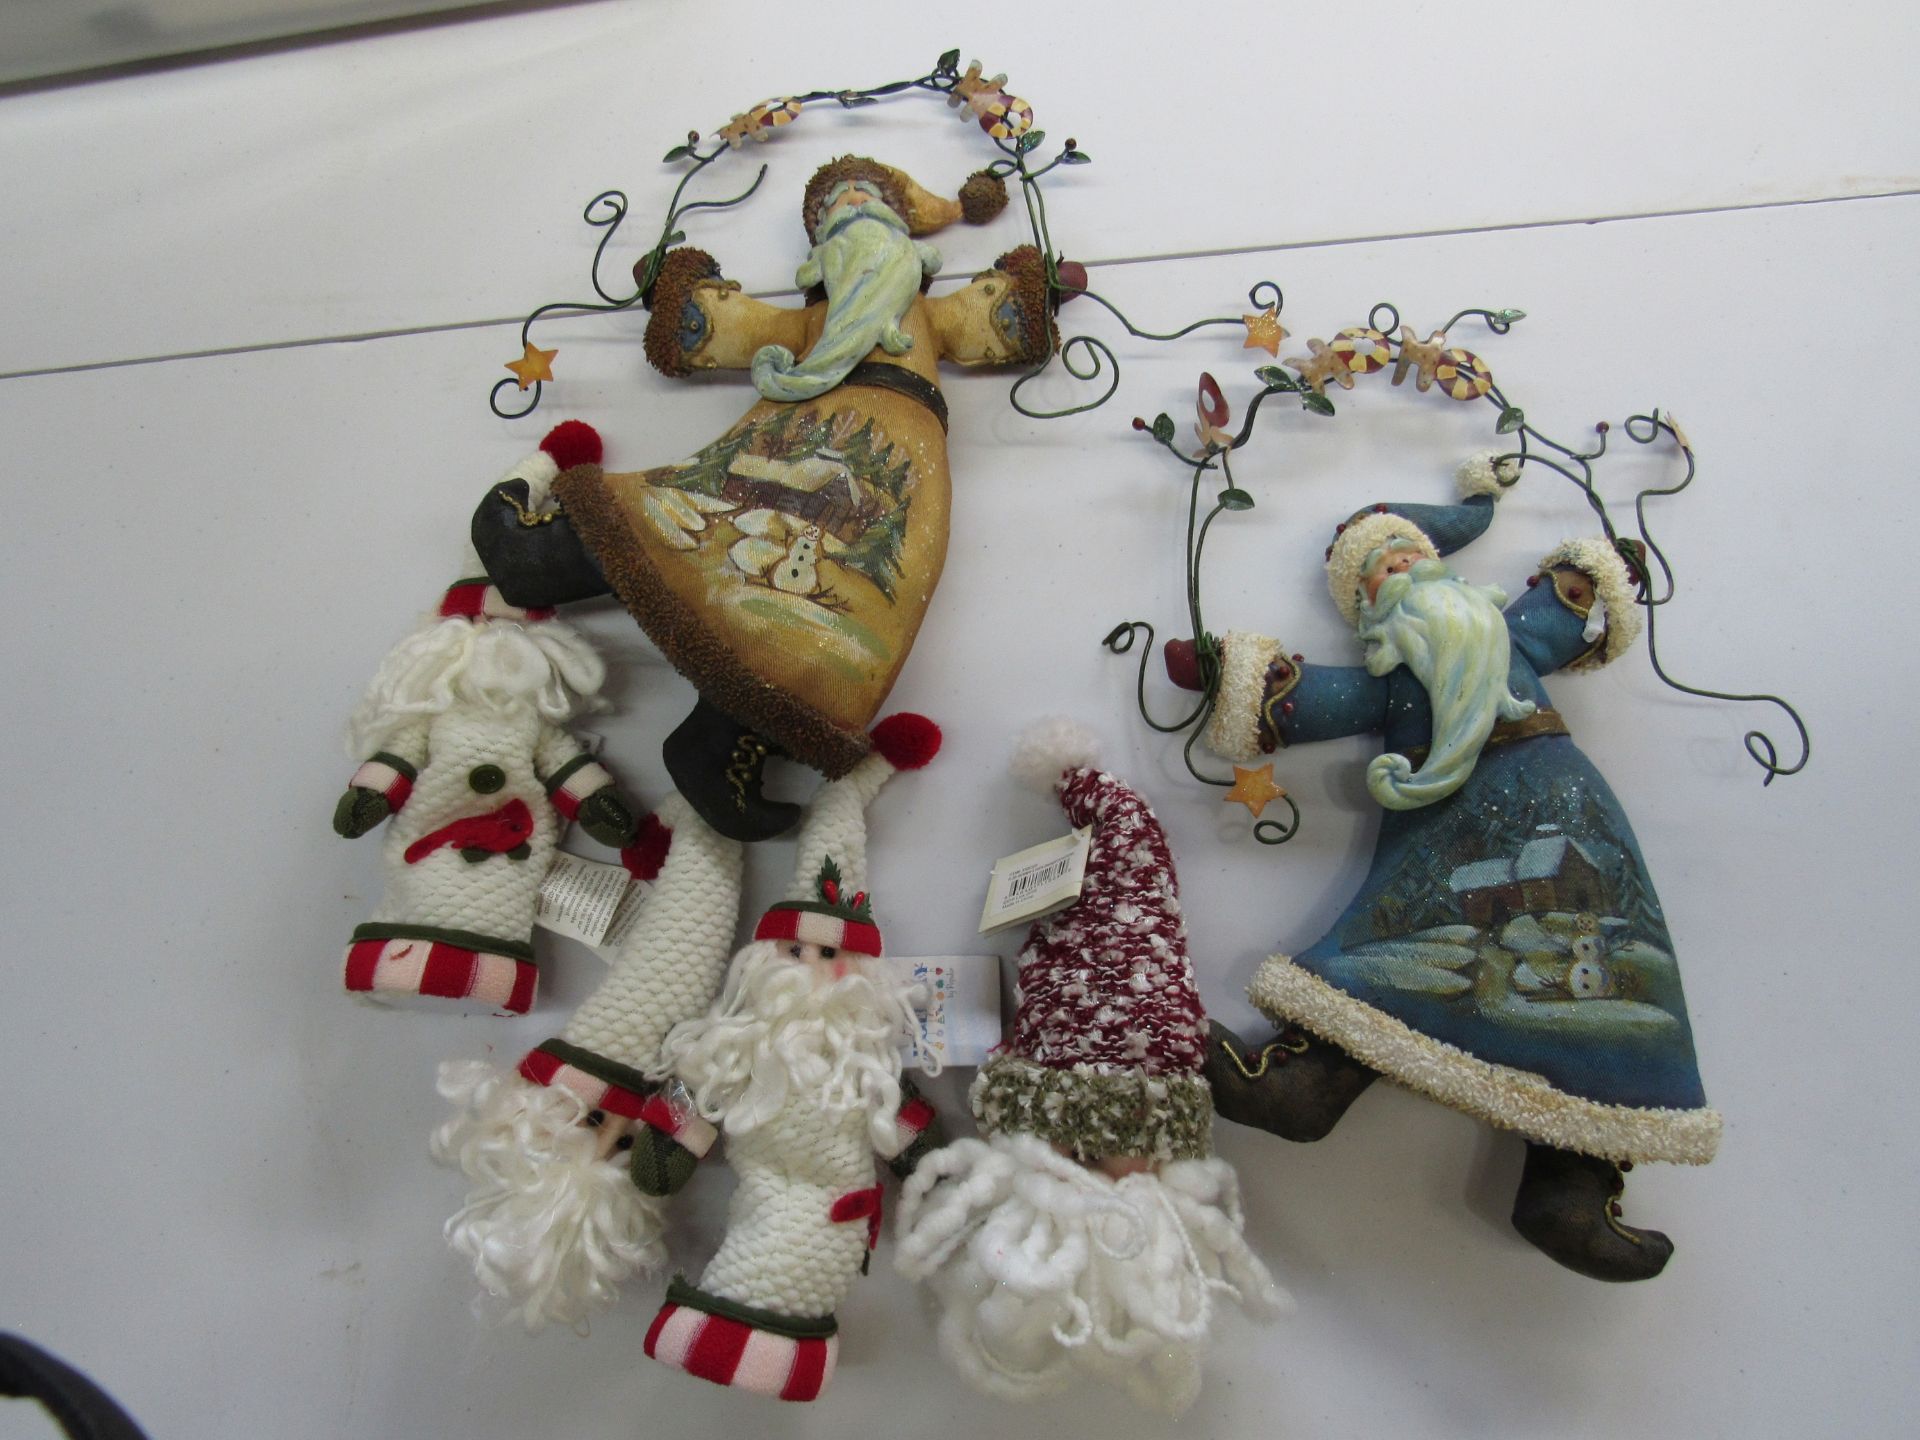 Group of assorted knitted ornaments: Santa Claus, snowmen, etc.